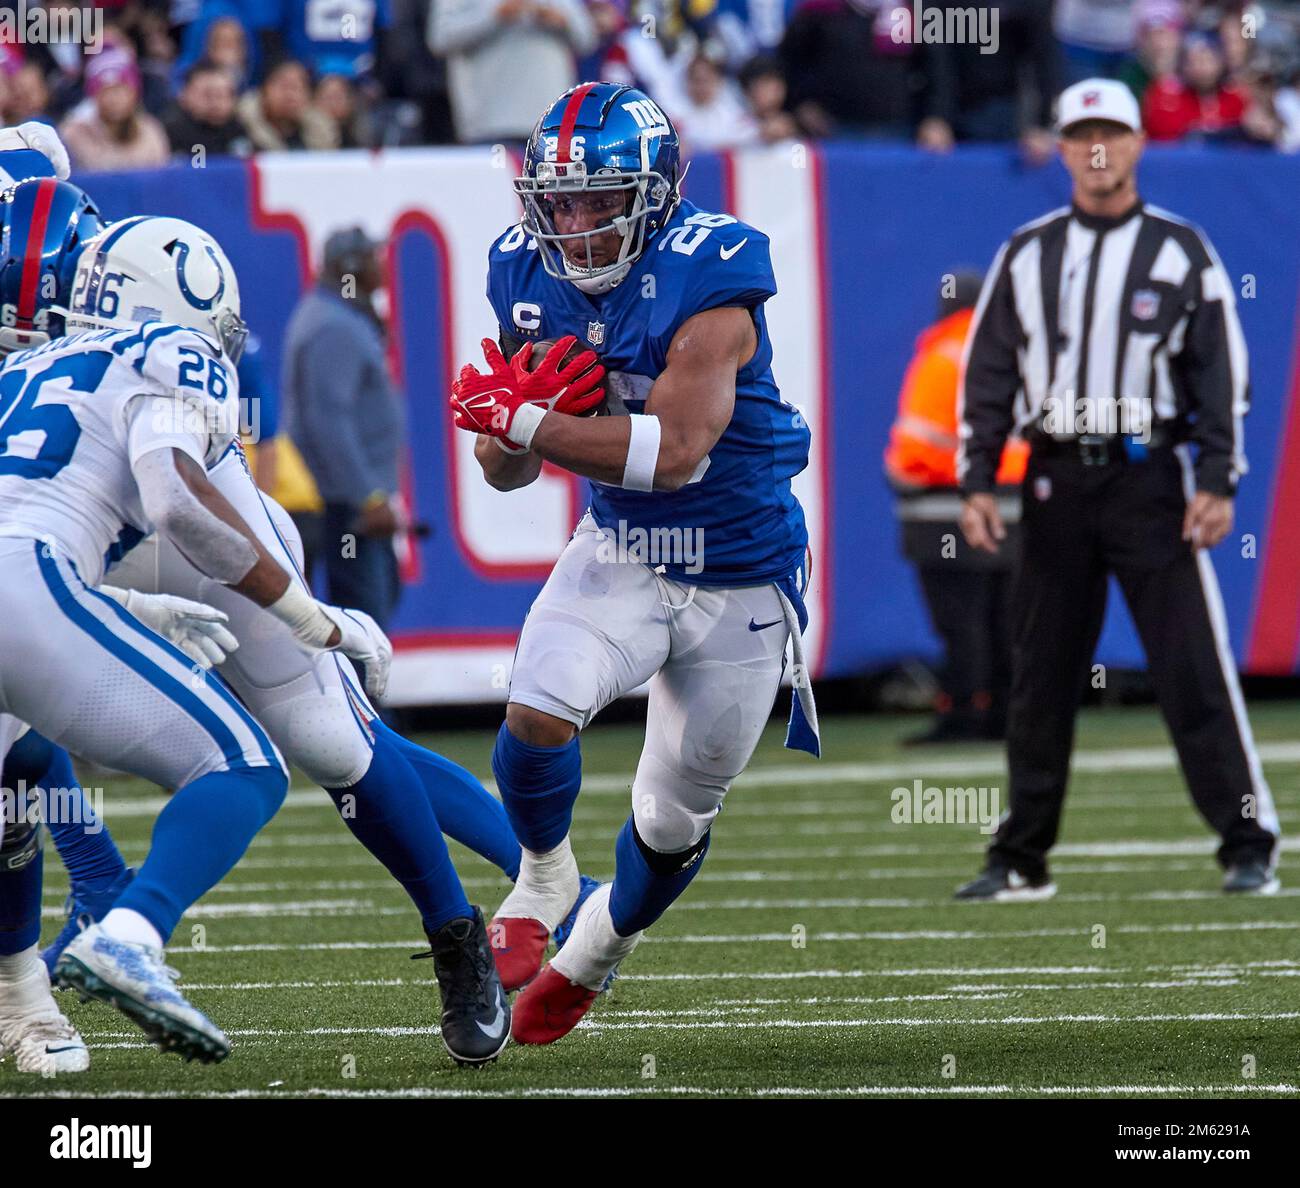 January 1, 2023, East Rutherford, New Jersey, USA: New York Giants running  back Saquon Barkley (26) runs up field during a NFL game against the  Indianapolis Colts in East Rutherford, New Jersey.